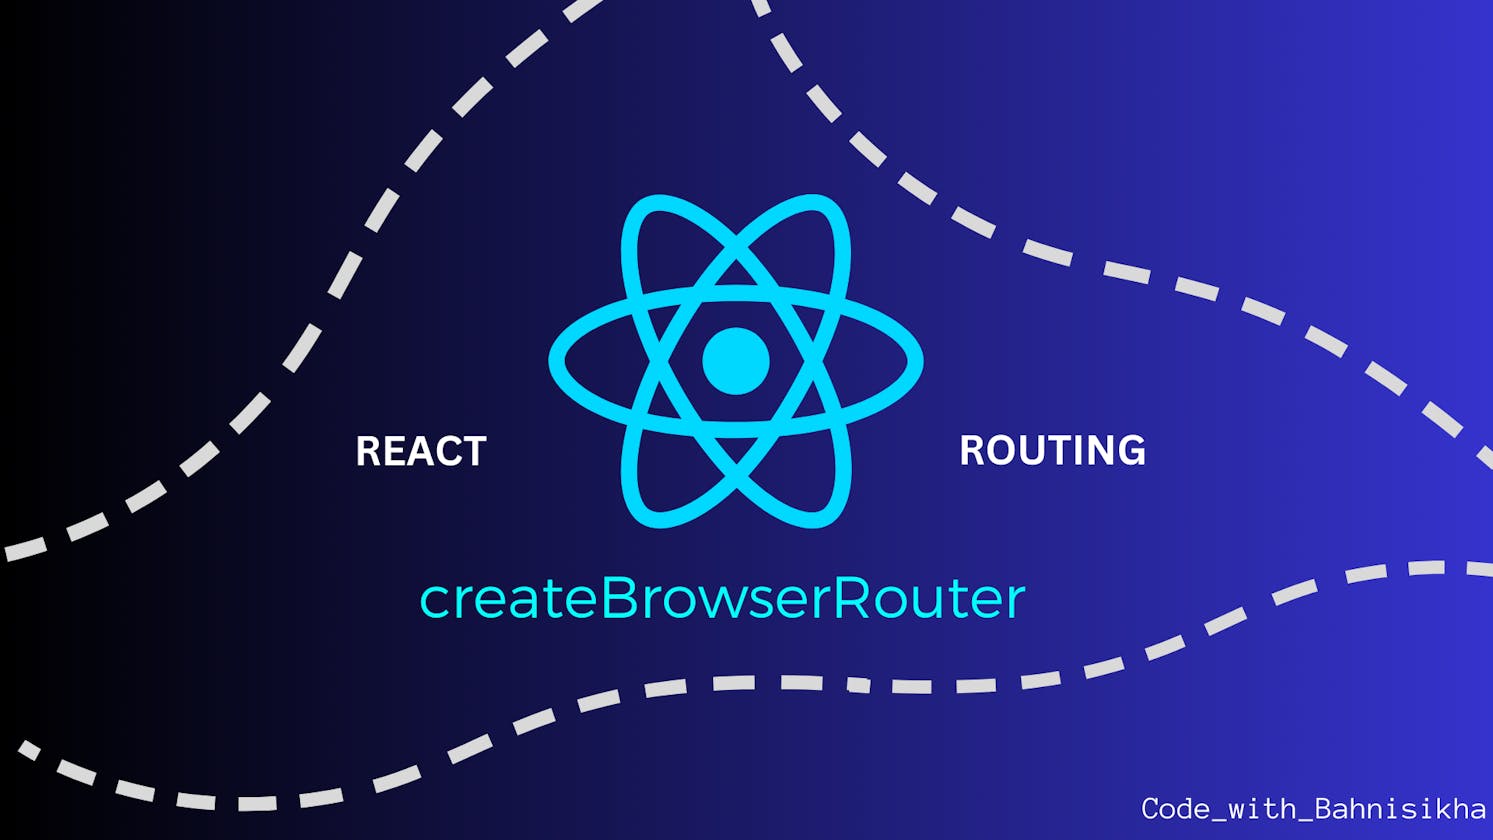 How to create routes with createBrowserRouter in React